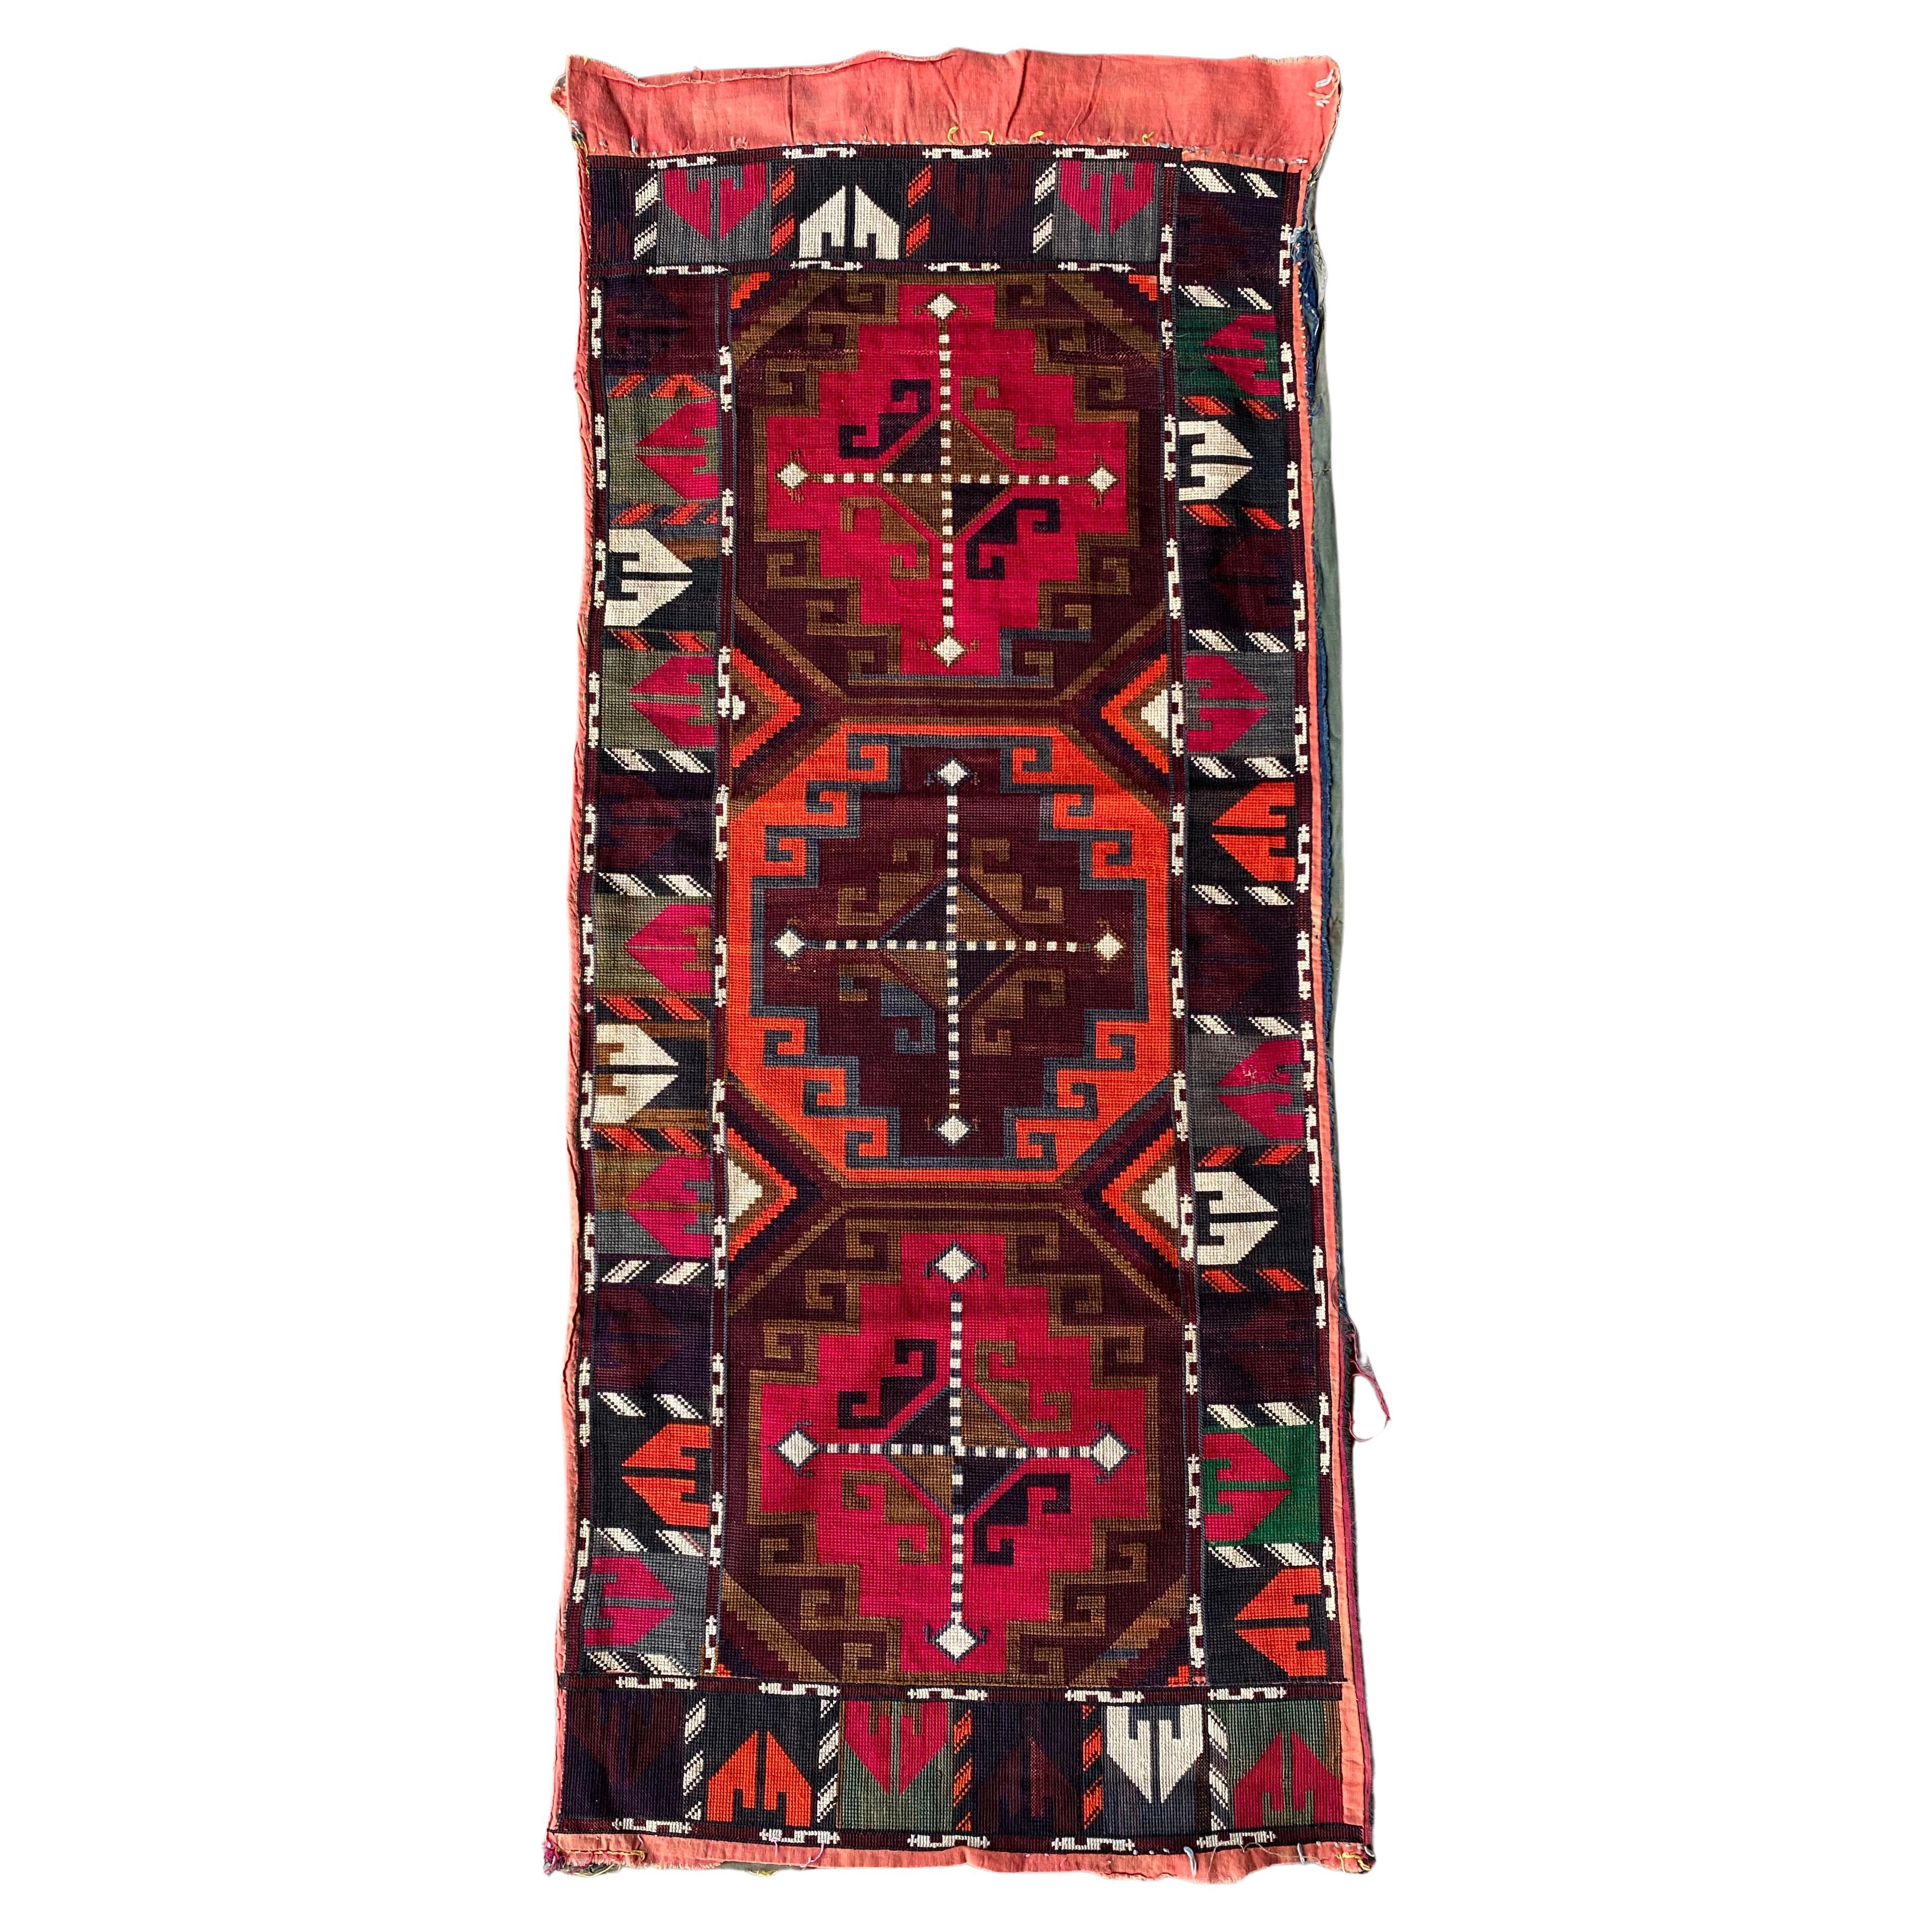 Central Asian Embroidered Textile, “Suzani”, Mid 20th Century For Sale